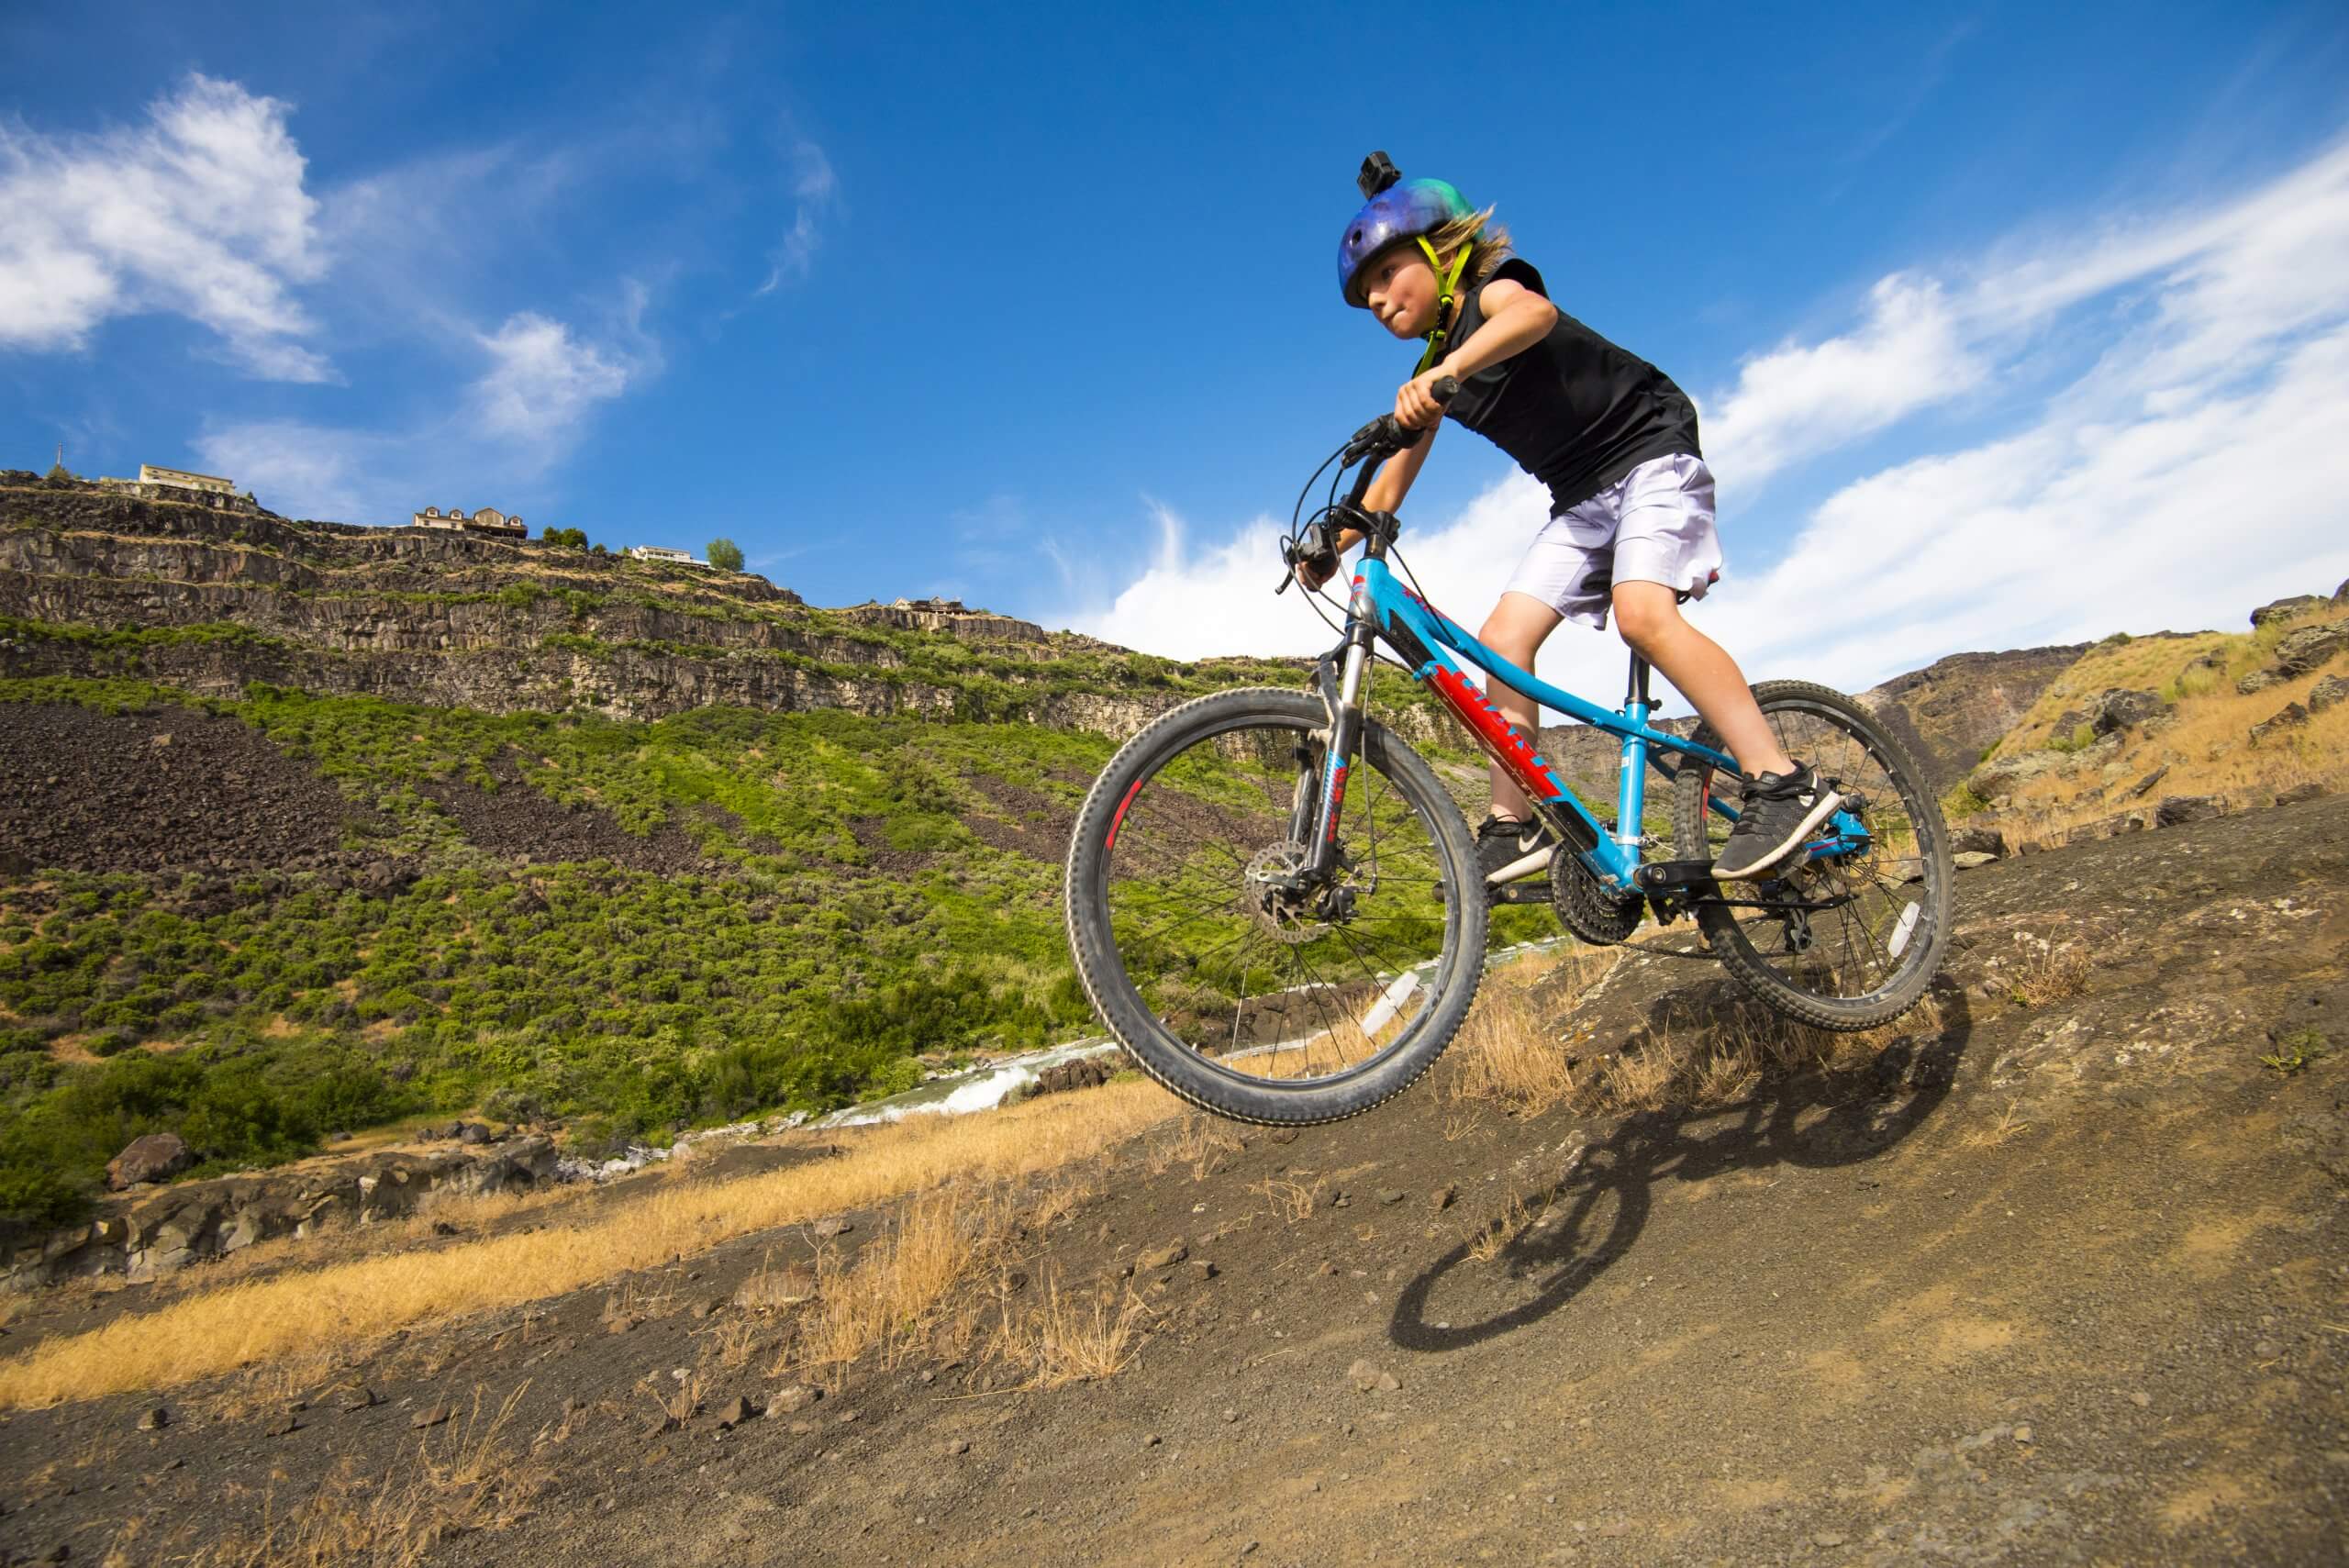 A child on a mountain bike in mid jump, going down a dirt trail surrounded by canyon walls in Snake River Canyon.